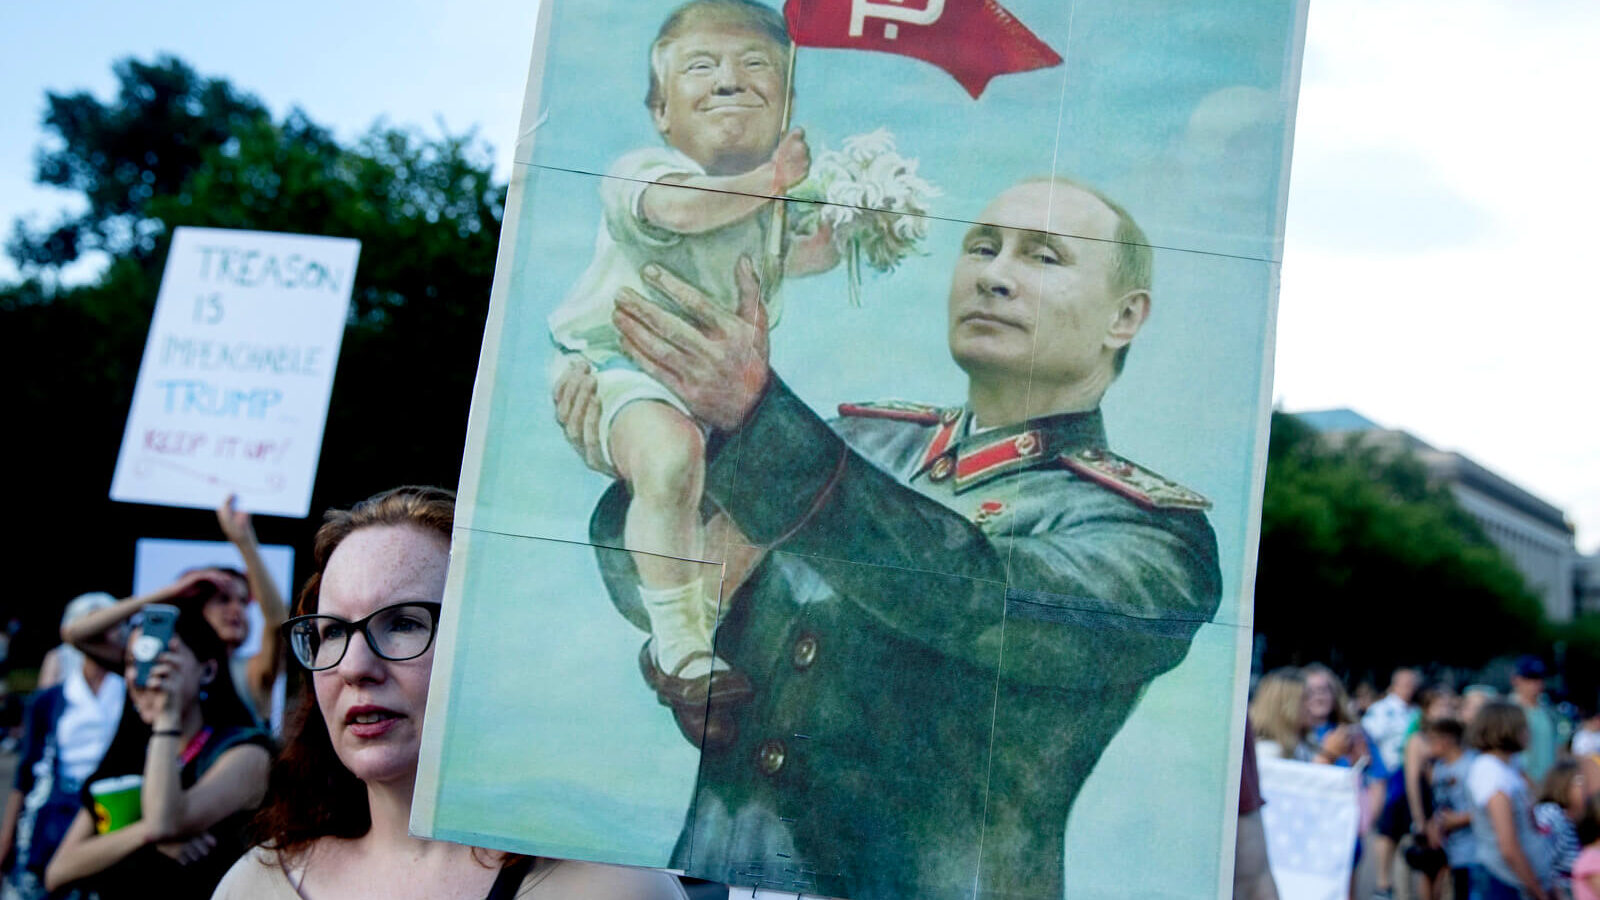 A woman holds a sign depicting Russian President Vladimir Putin and President Donald Trump during a protest outside the White House, July 17, 2018, in Washington. Andrew Harnik | AP